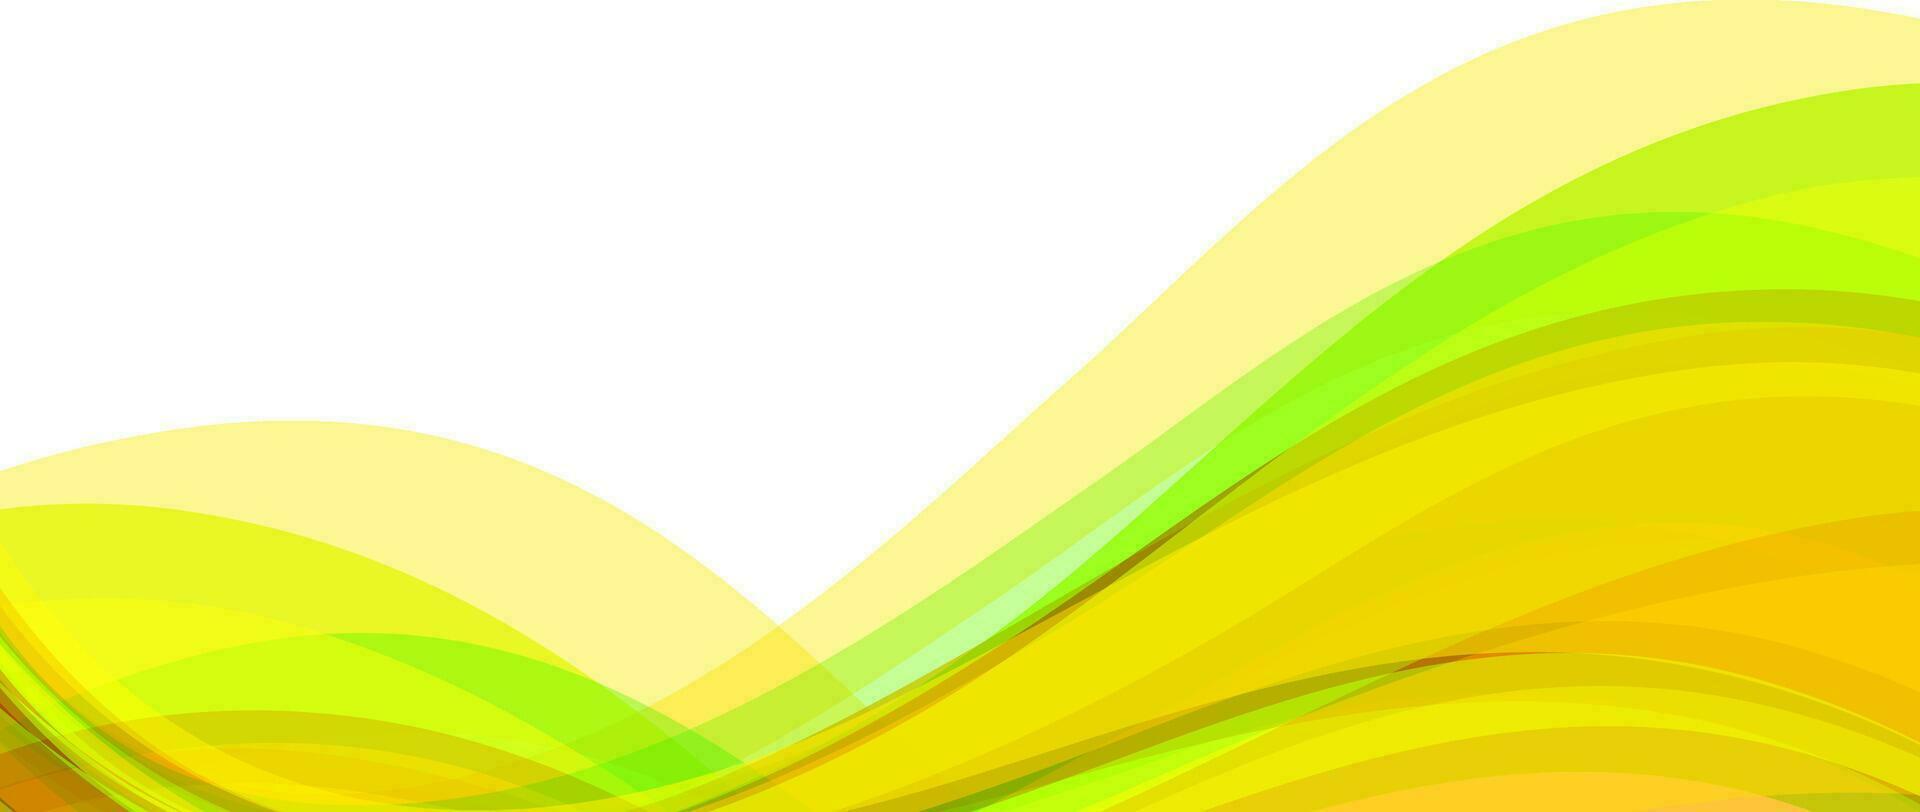 Abstract yellow and green waves design. vector